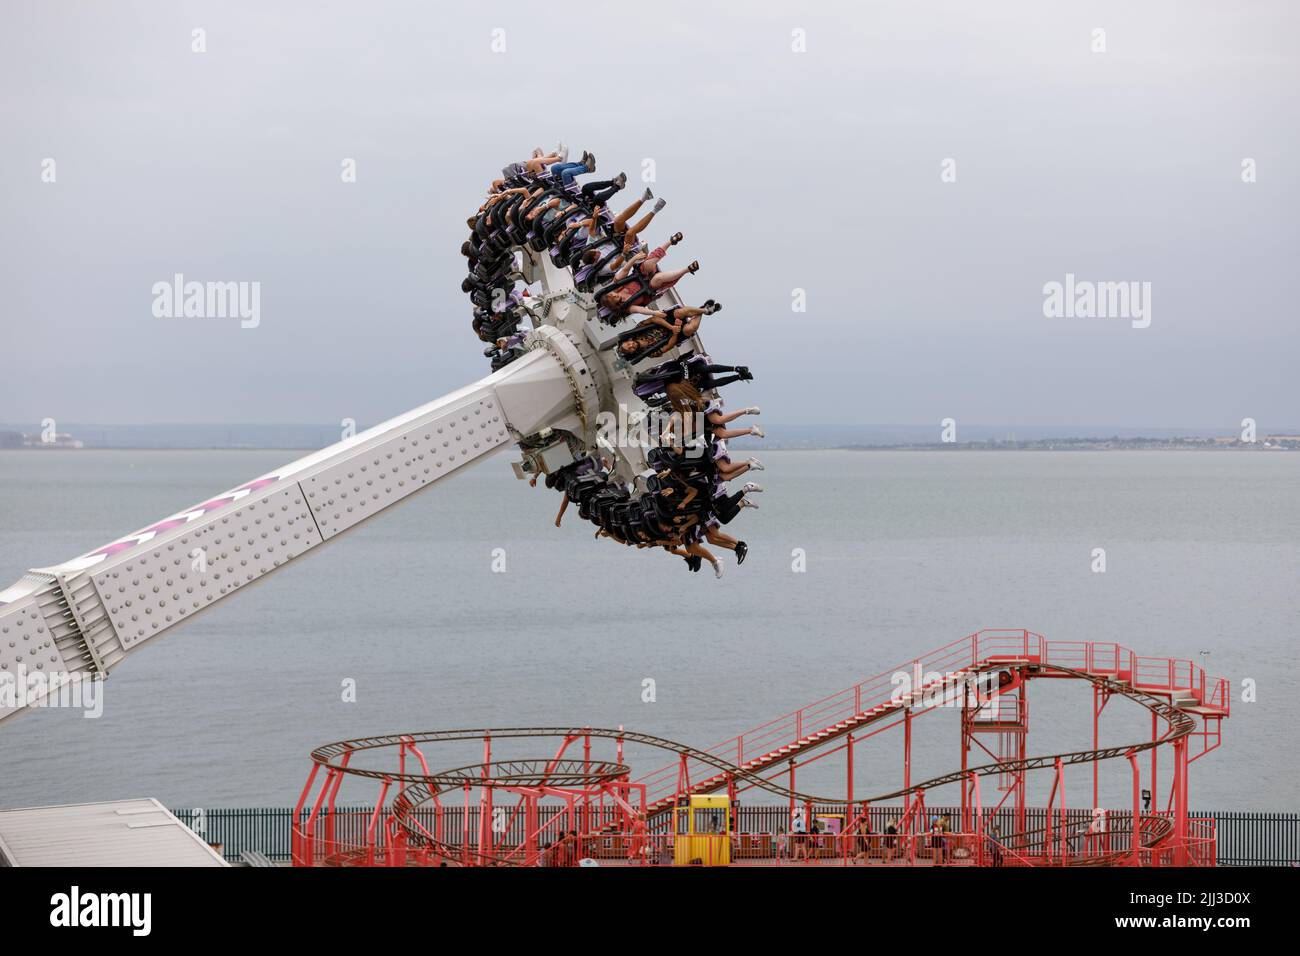 A pendulum ride gondola mid air with people hanging upside down with legs in the air. Stock Photo